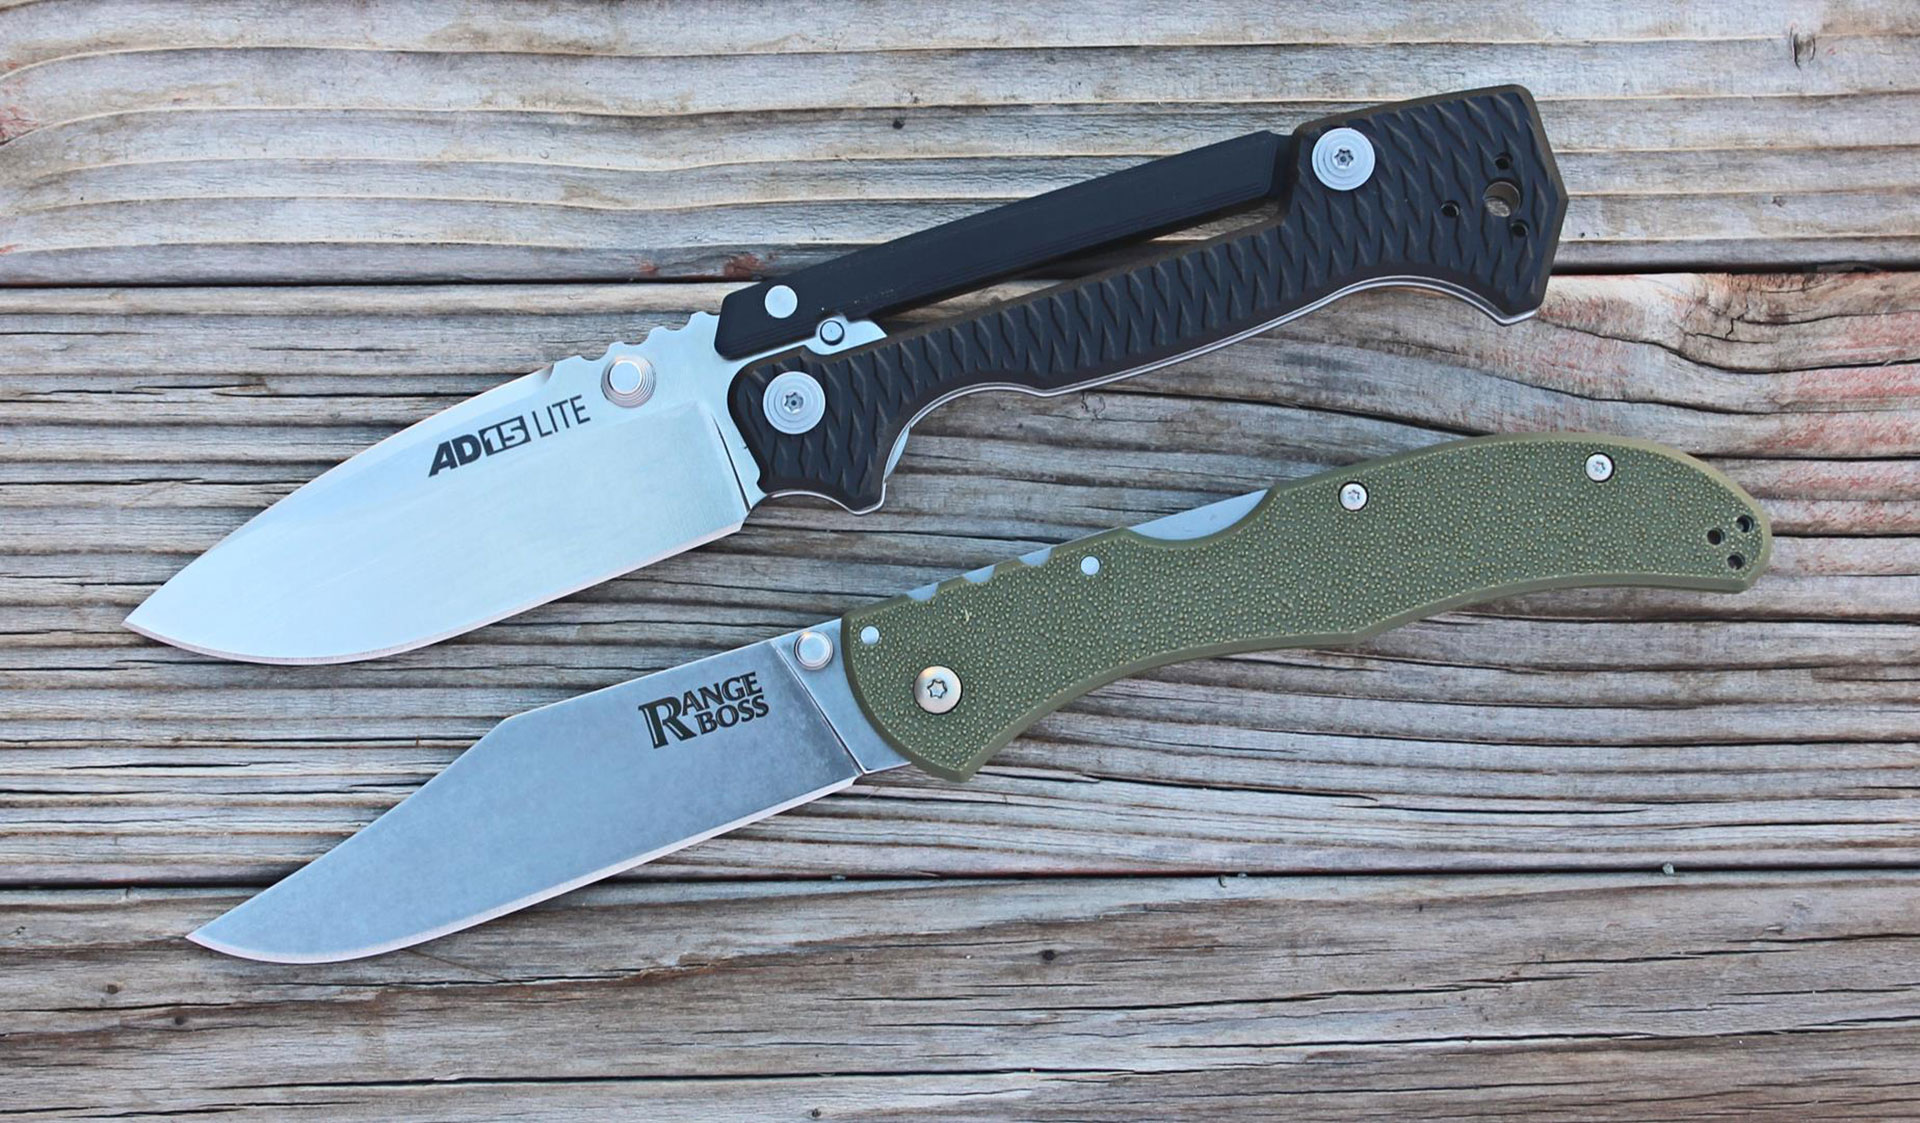 The Cold Steel AD-15 Lite and Range Boss folding knives.